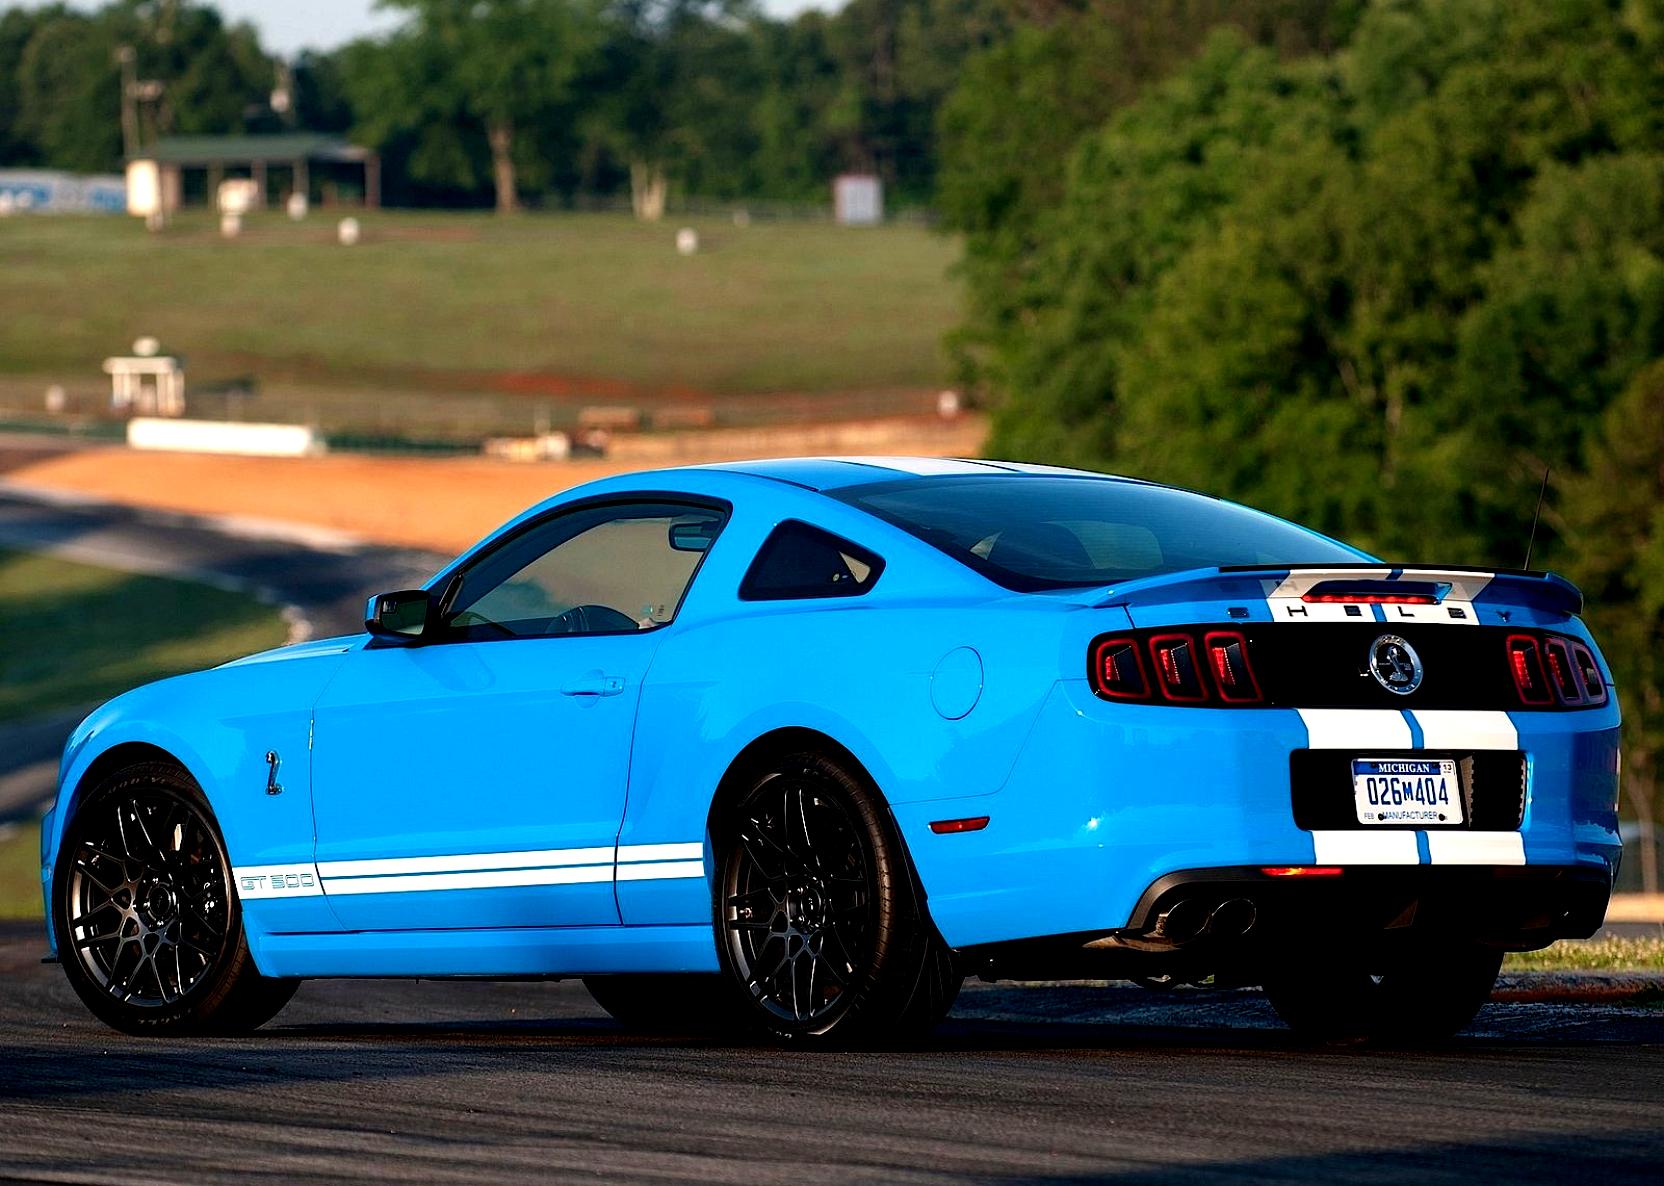 Ford Mustang Shelby GT500 2012 #10